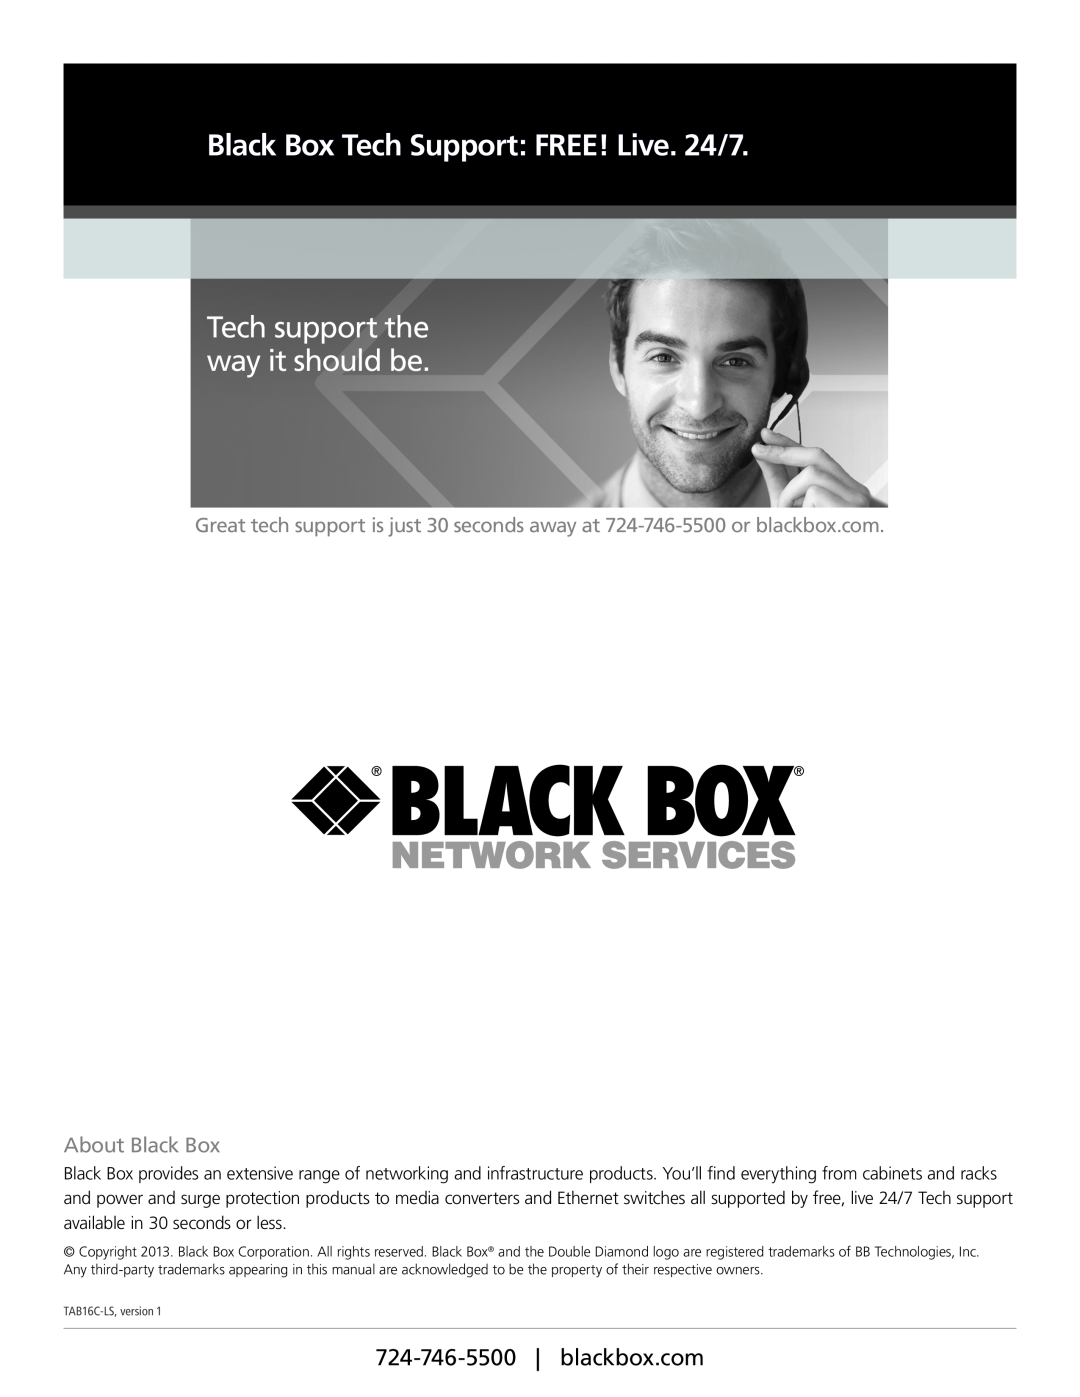 Black Box TAB16CS-LS manual About Black Box, Black Box Tech Support FREE! Live. 24/7, Tech support the way it should be 